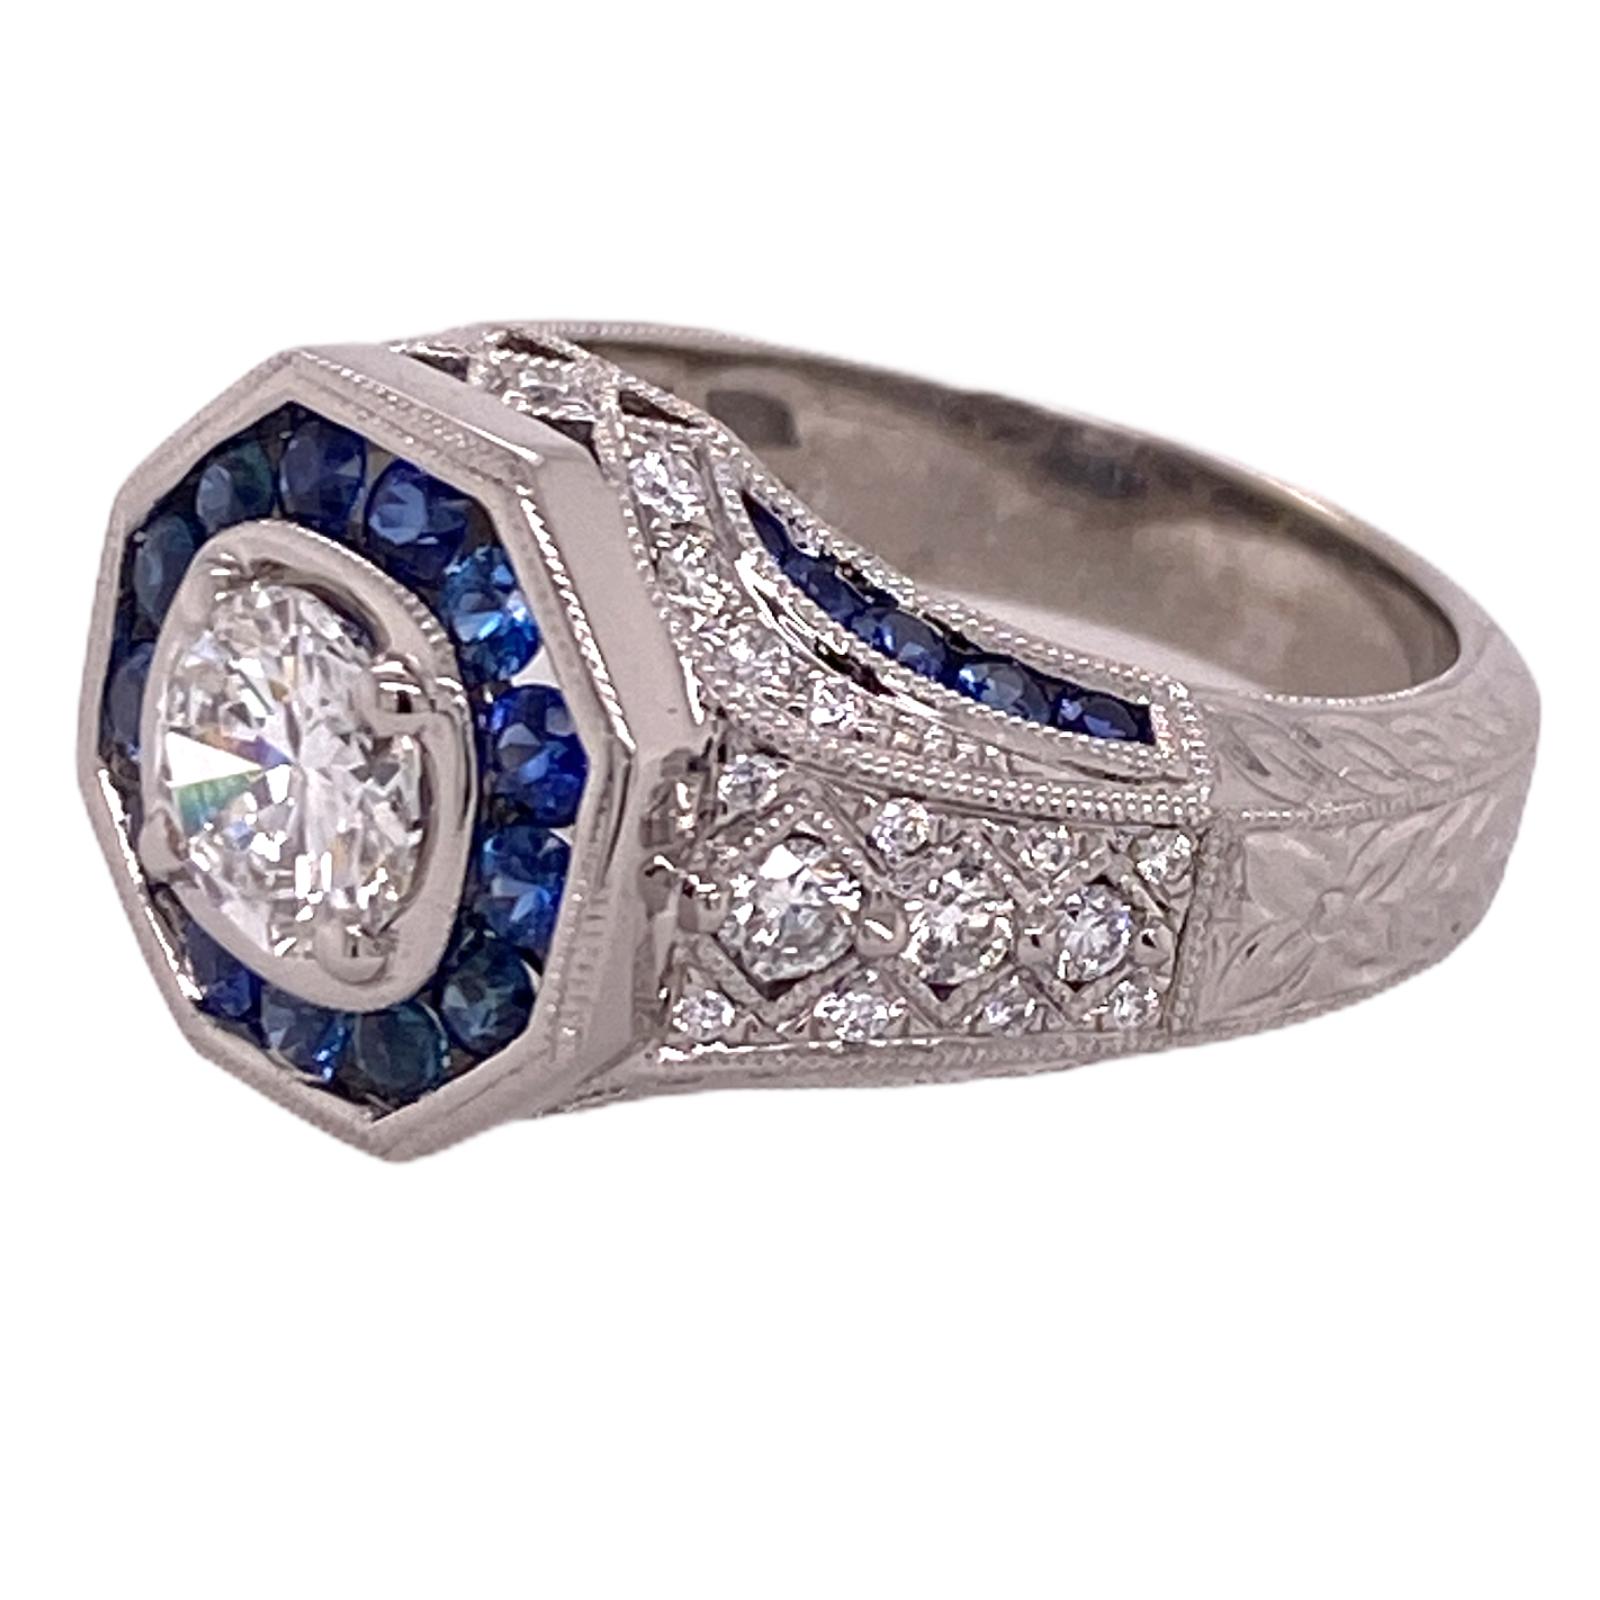 Stunning diamond and sapphire engagement ring fashioned in 14 karat white gold. The center round brilliant cut diamond weighs .75 carats and is graded G color and VVS clarity. The diamond is surrounded by 20 round blue sapphires and another 40 round